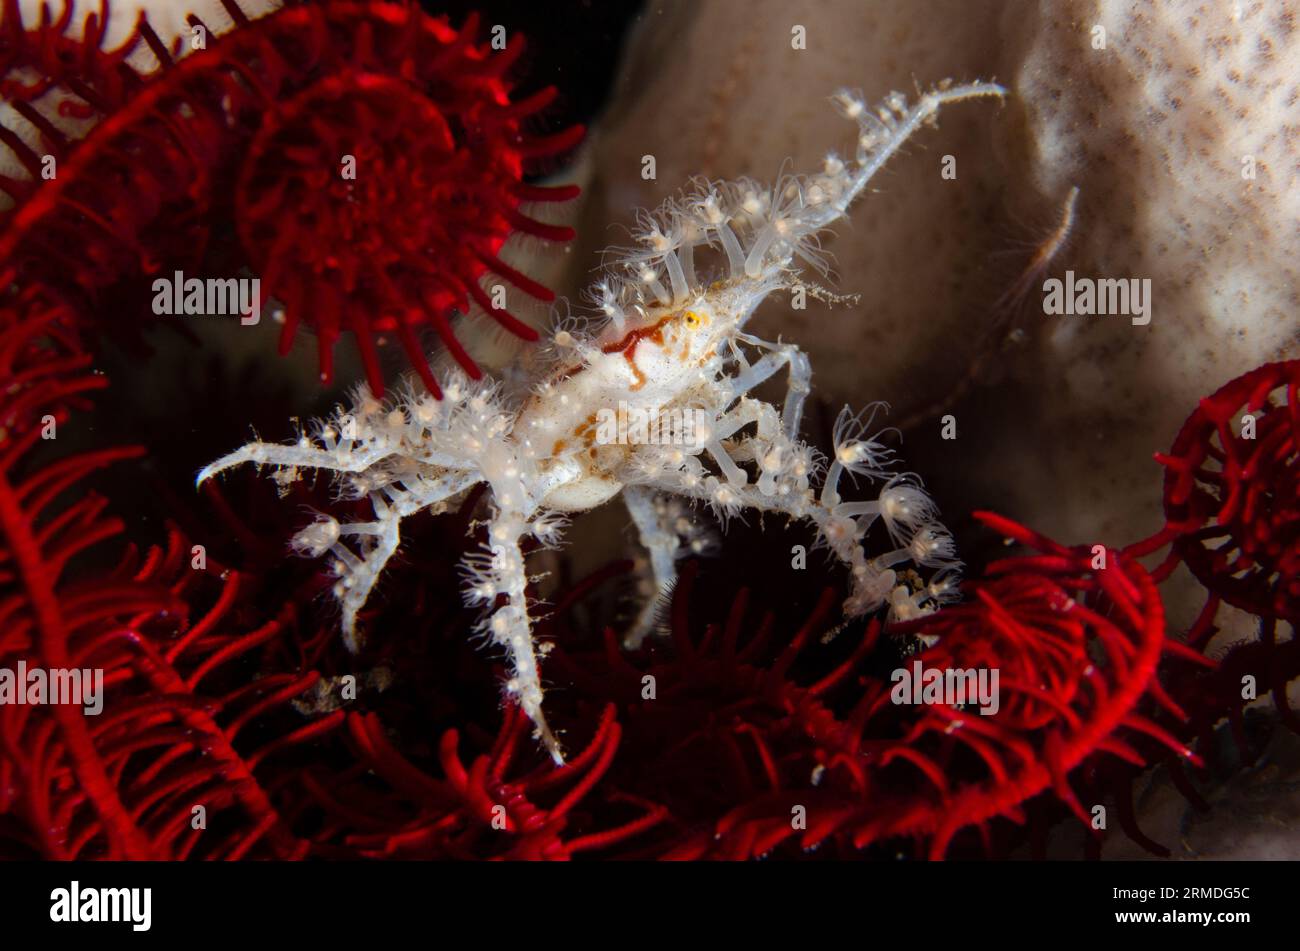 Spider Crab, Achaeus spinosus, carrying small Anemones for protection and camouflage in Crinoid, Comatulida Order, night dive, Scuba Seraya House Reef Stock Photo